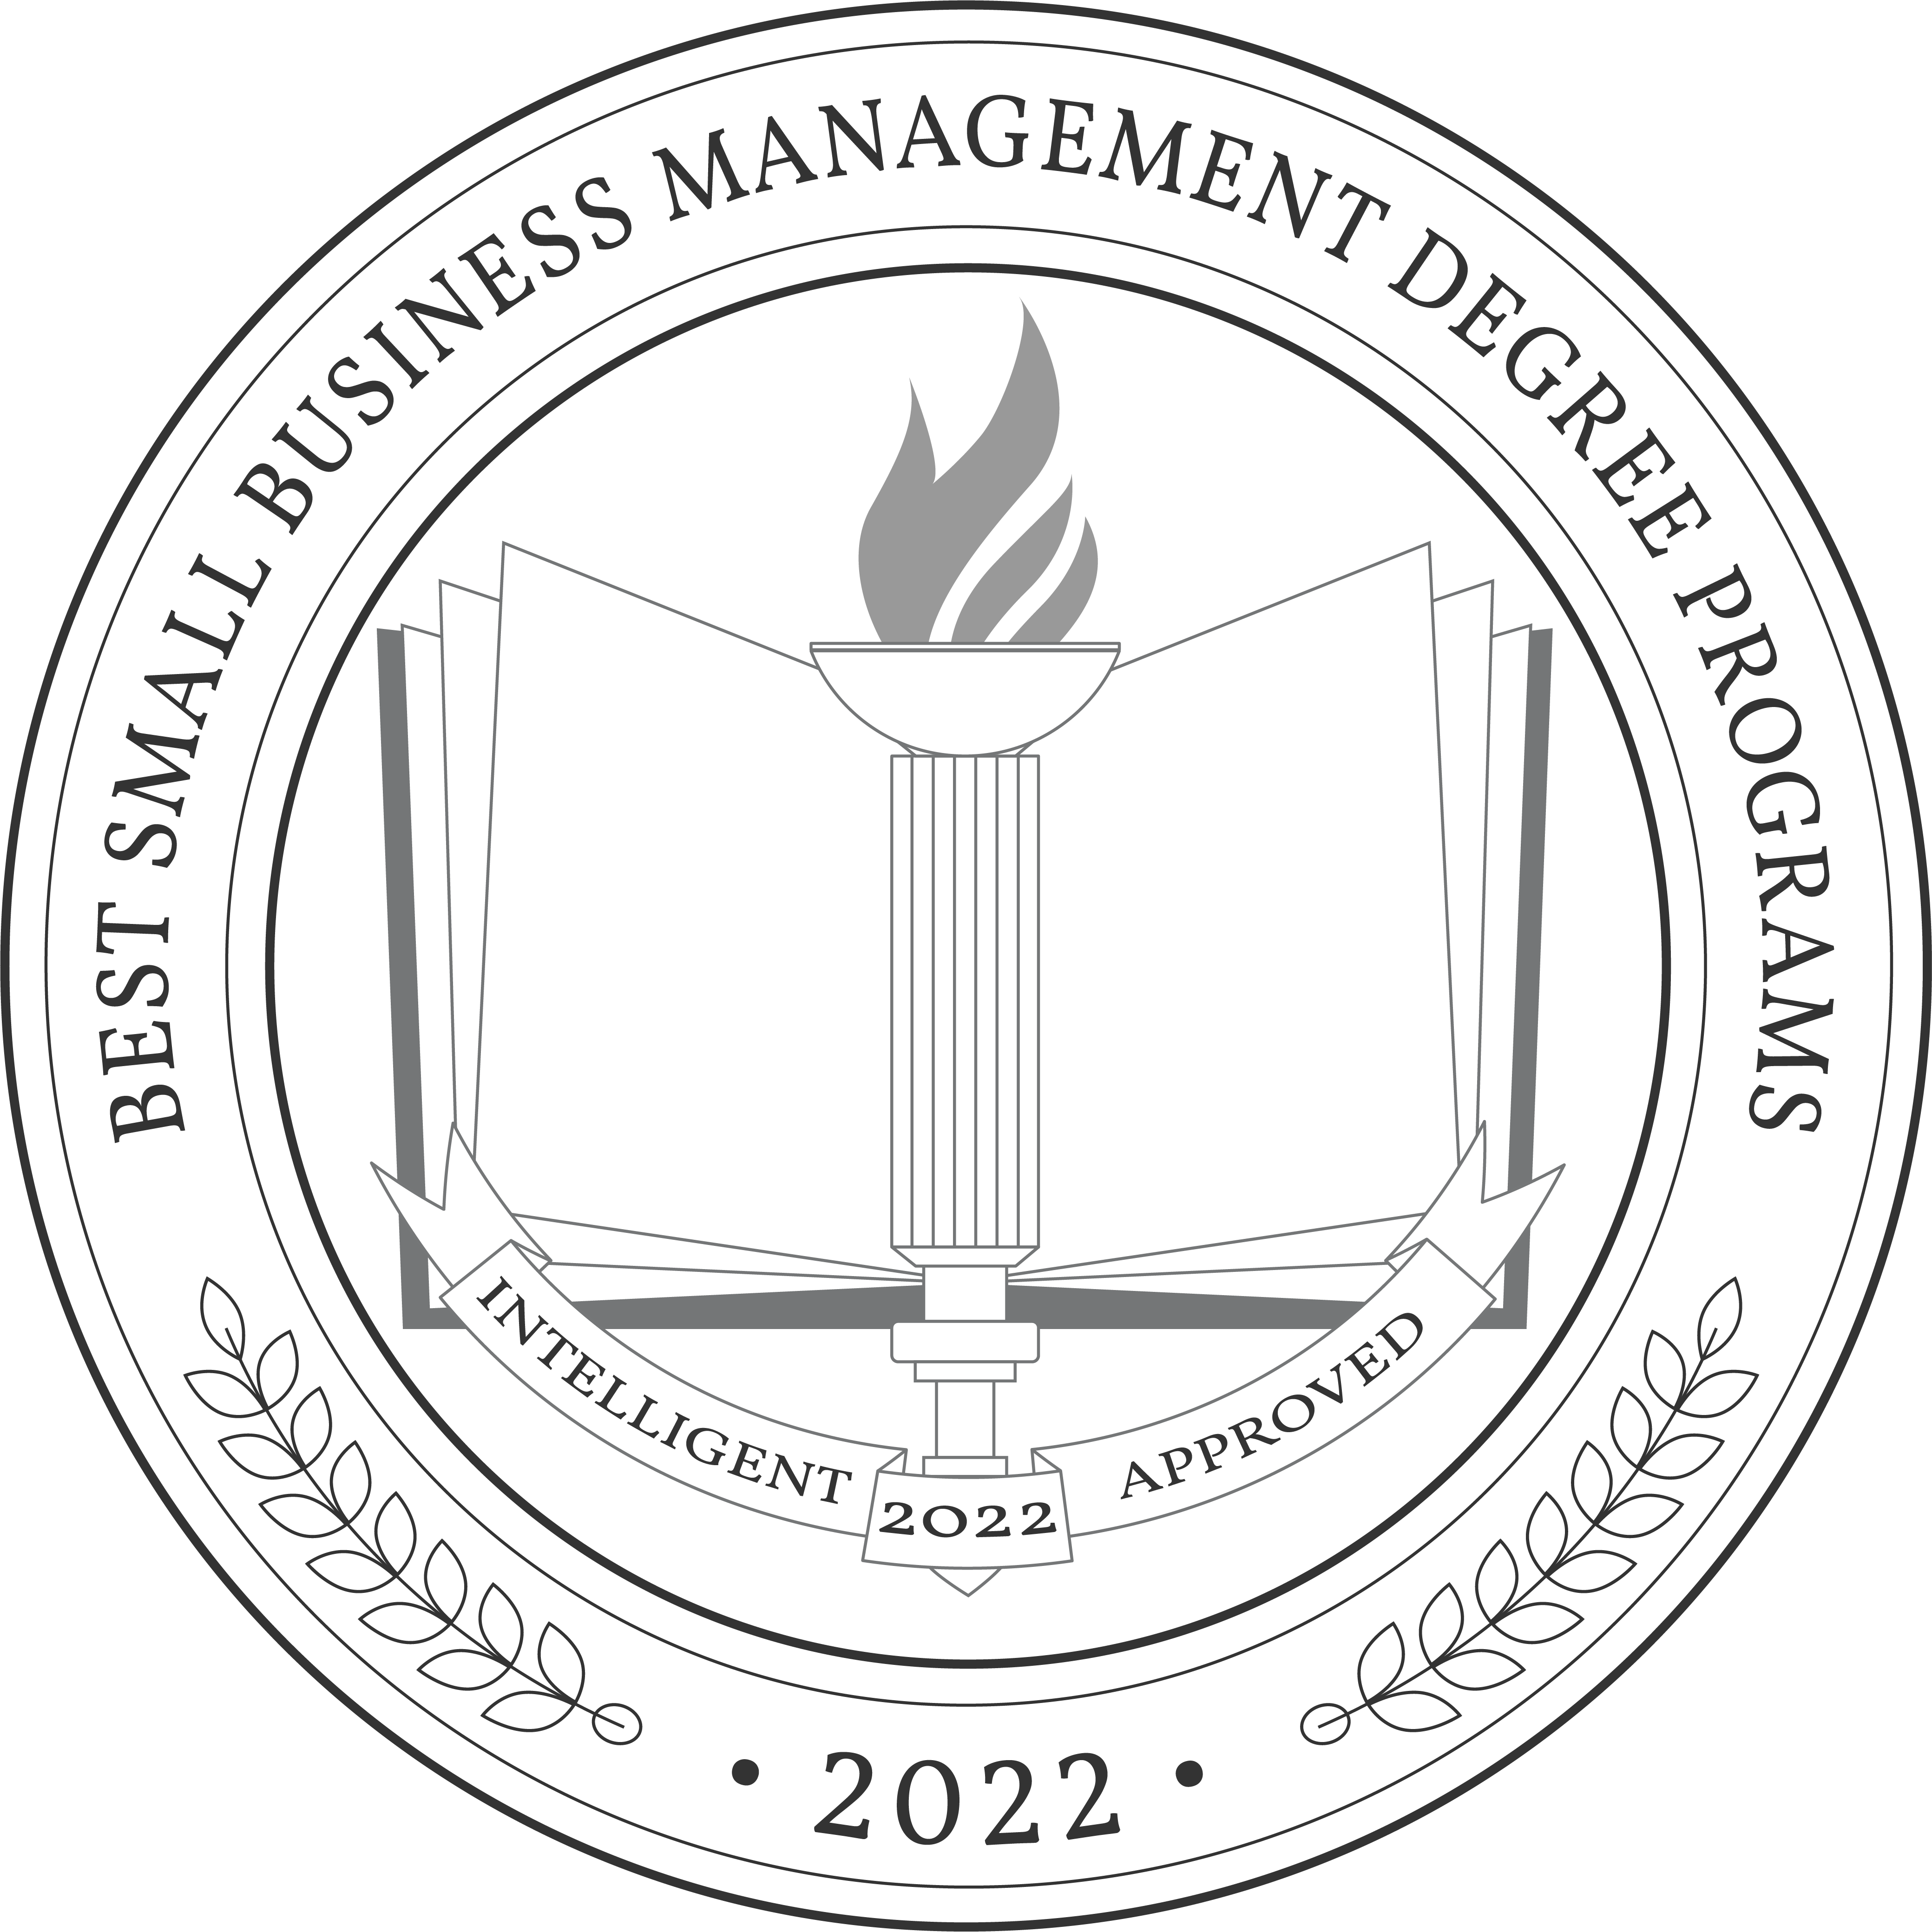 Best-Small-Business-Management-Degree-Programs-Badge-1.png